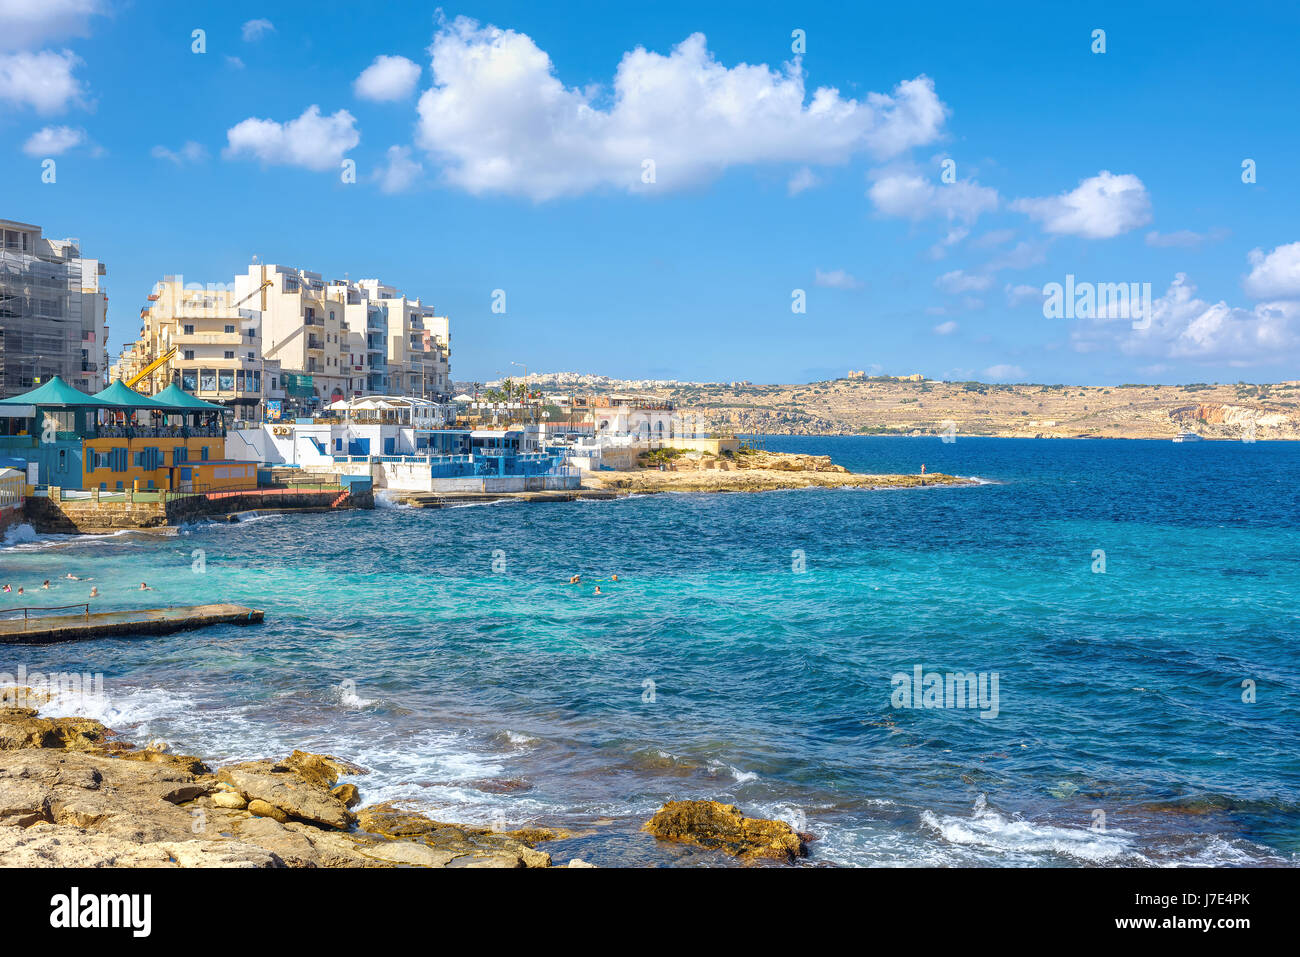 View of stone shore and seaside buildings in Bugibba district. Malta Stock Photo